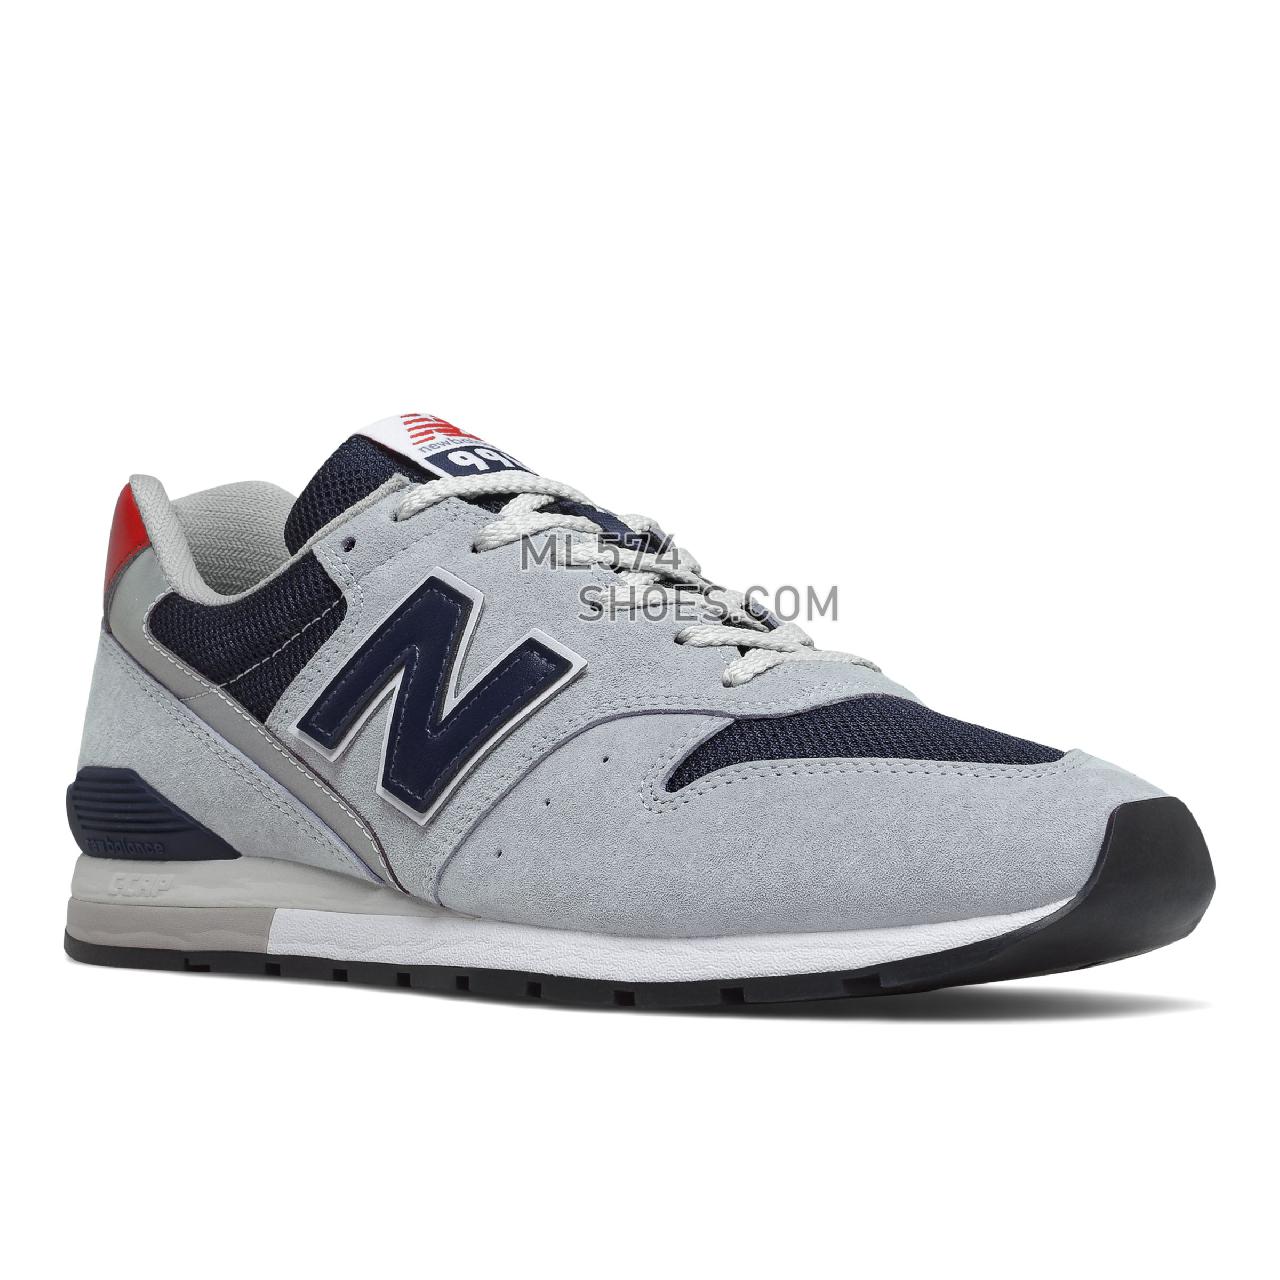 New Balance 996v2 - Men's Classic Sneakers - Reflection with Pigment - CM996SHD